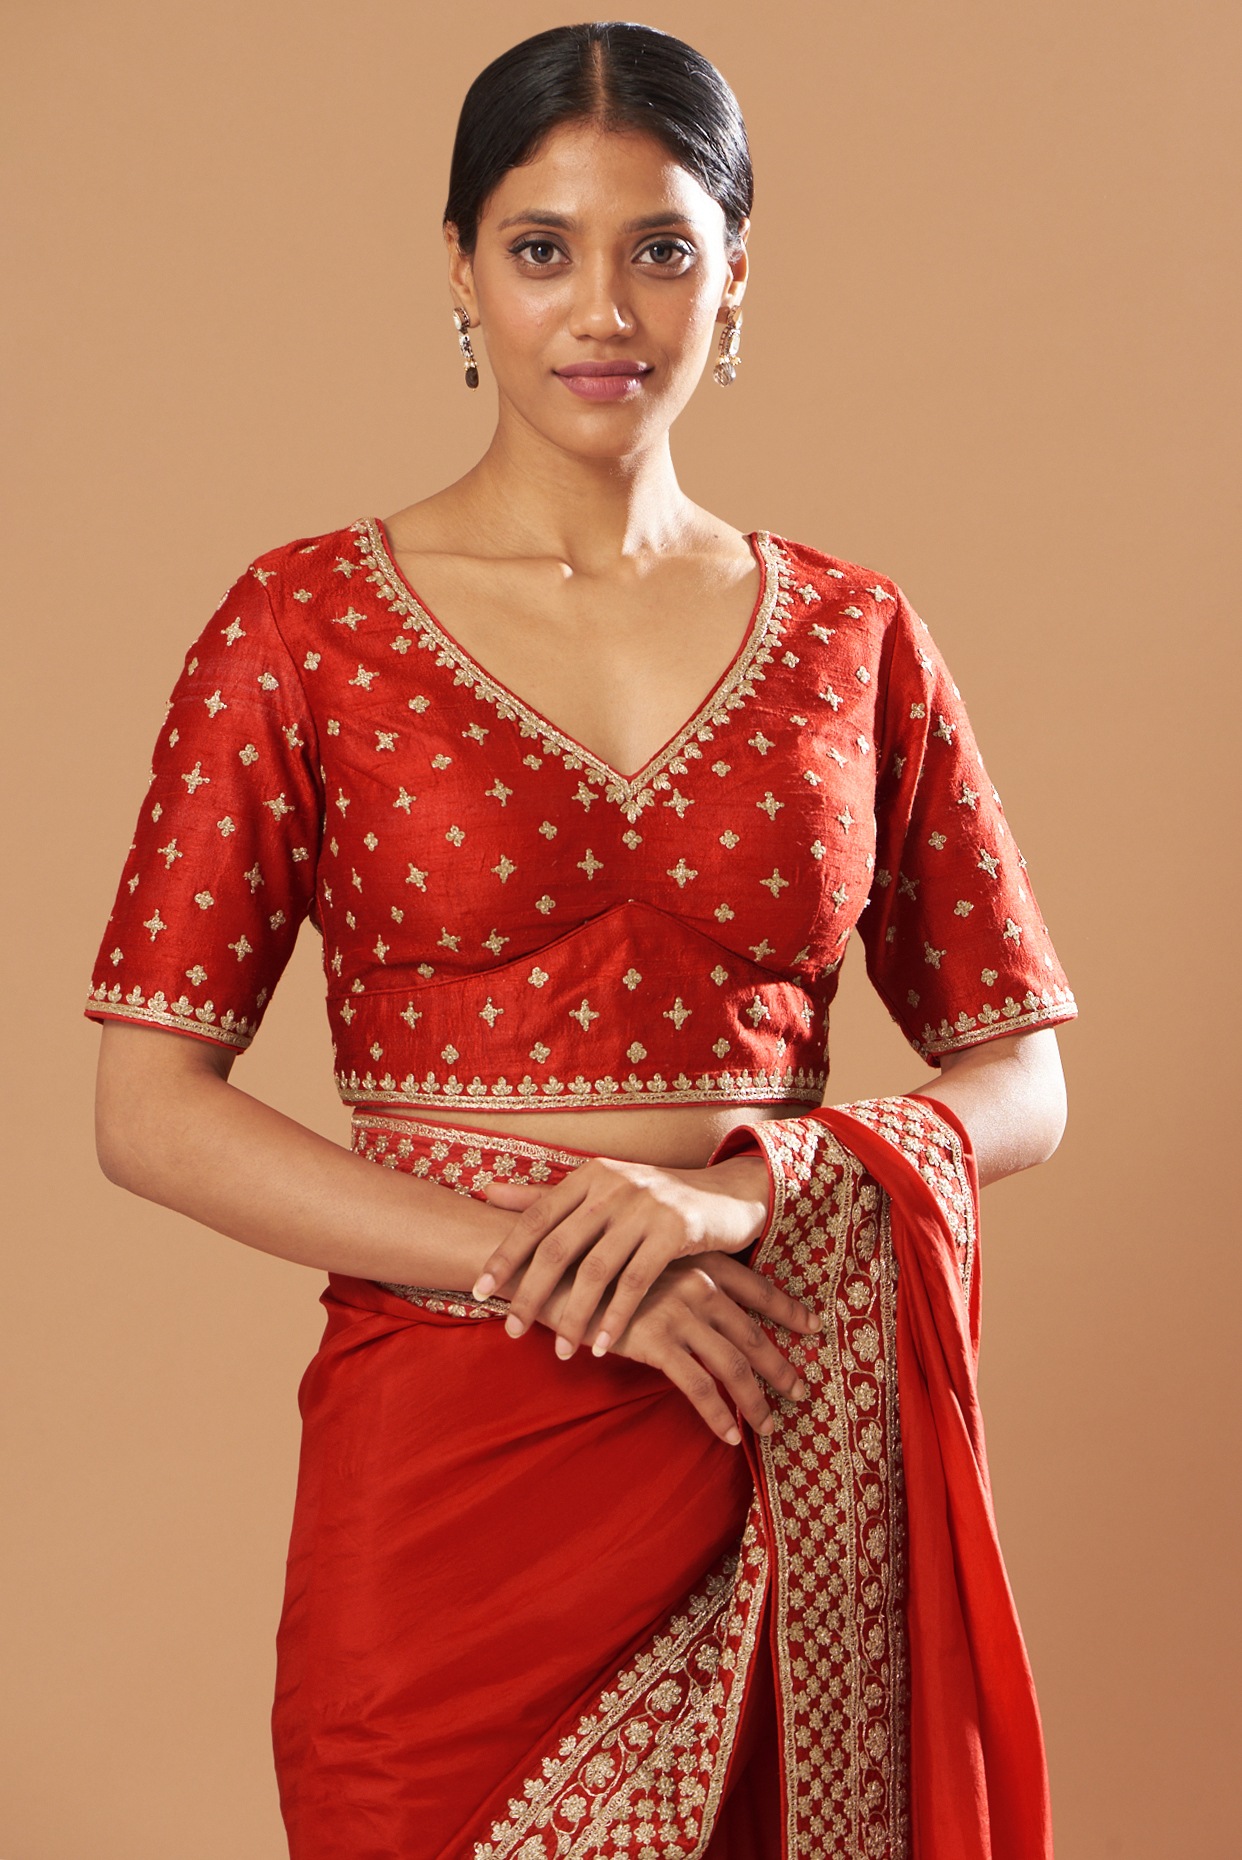 Red Bridal Saree Designs for Your Wedding Soiree and Beyond